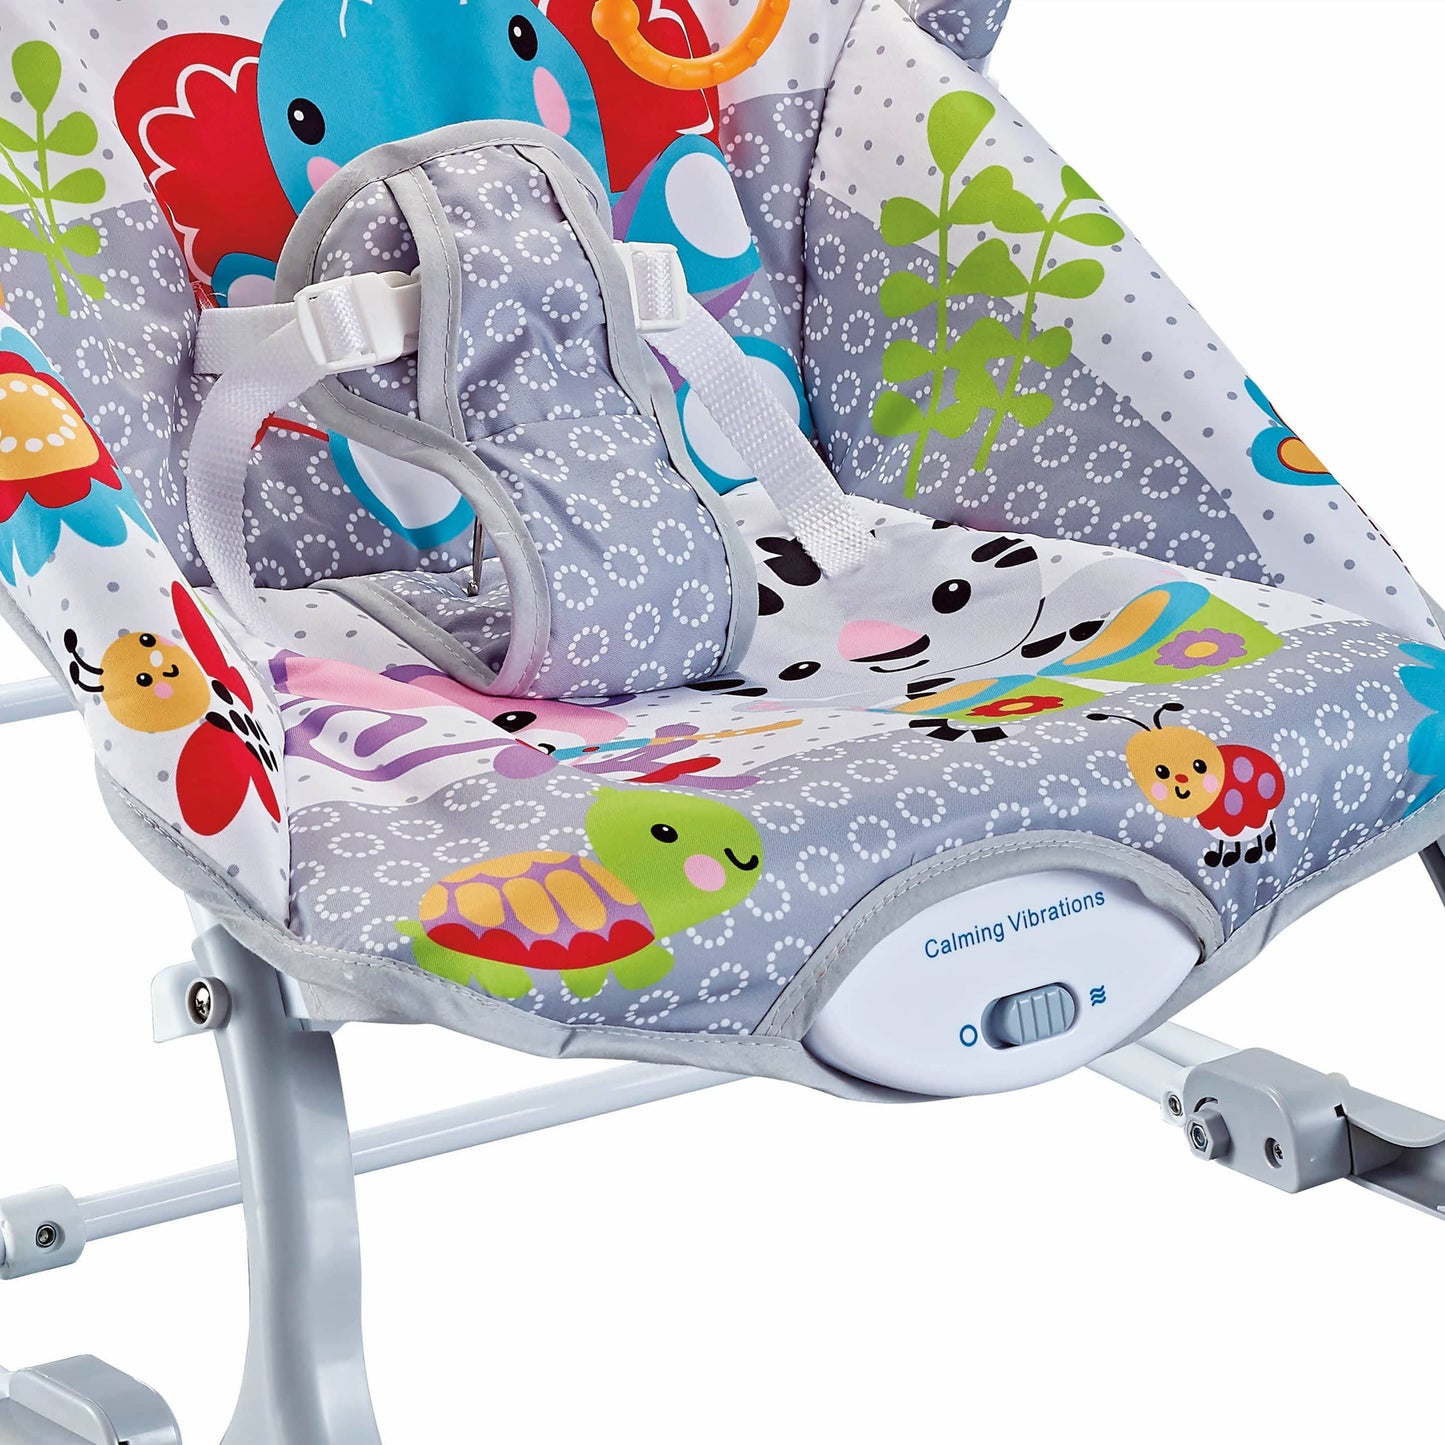 COOLBABY DY8615,Grey ,Baby Multi-function Baby Rocking Chair - COOL BABY